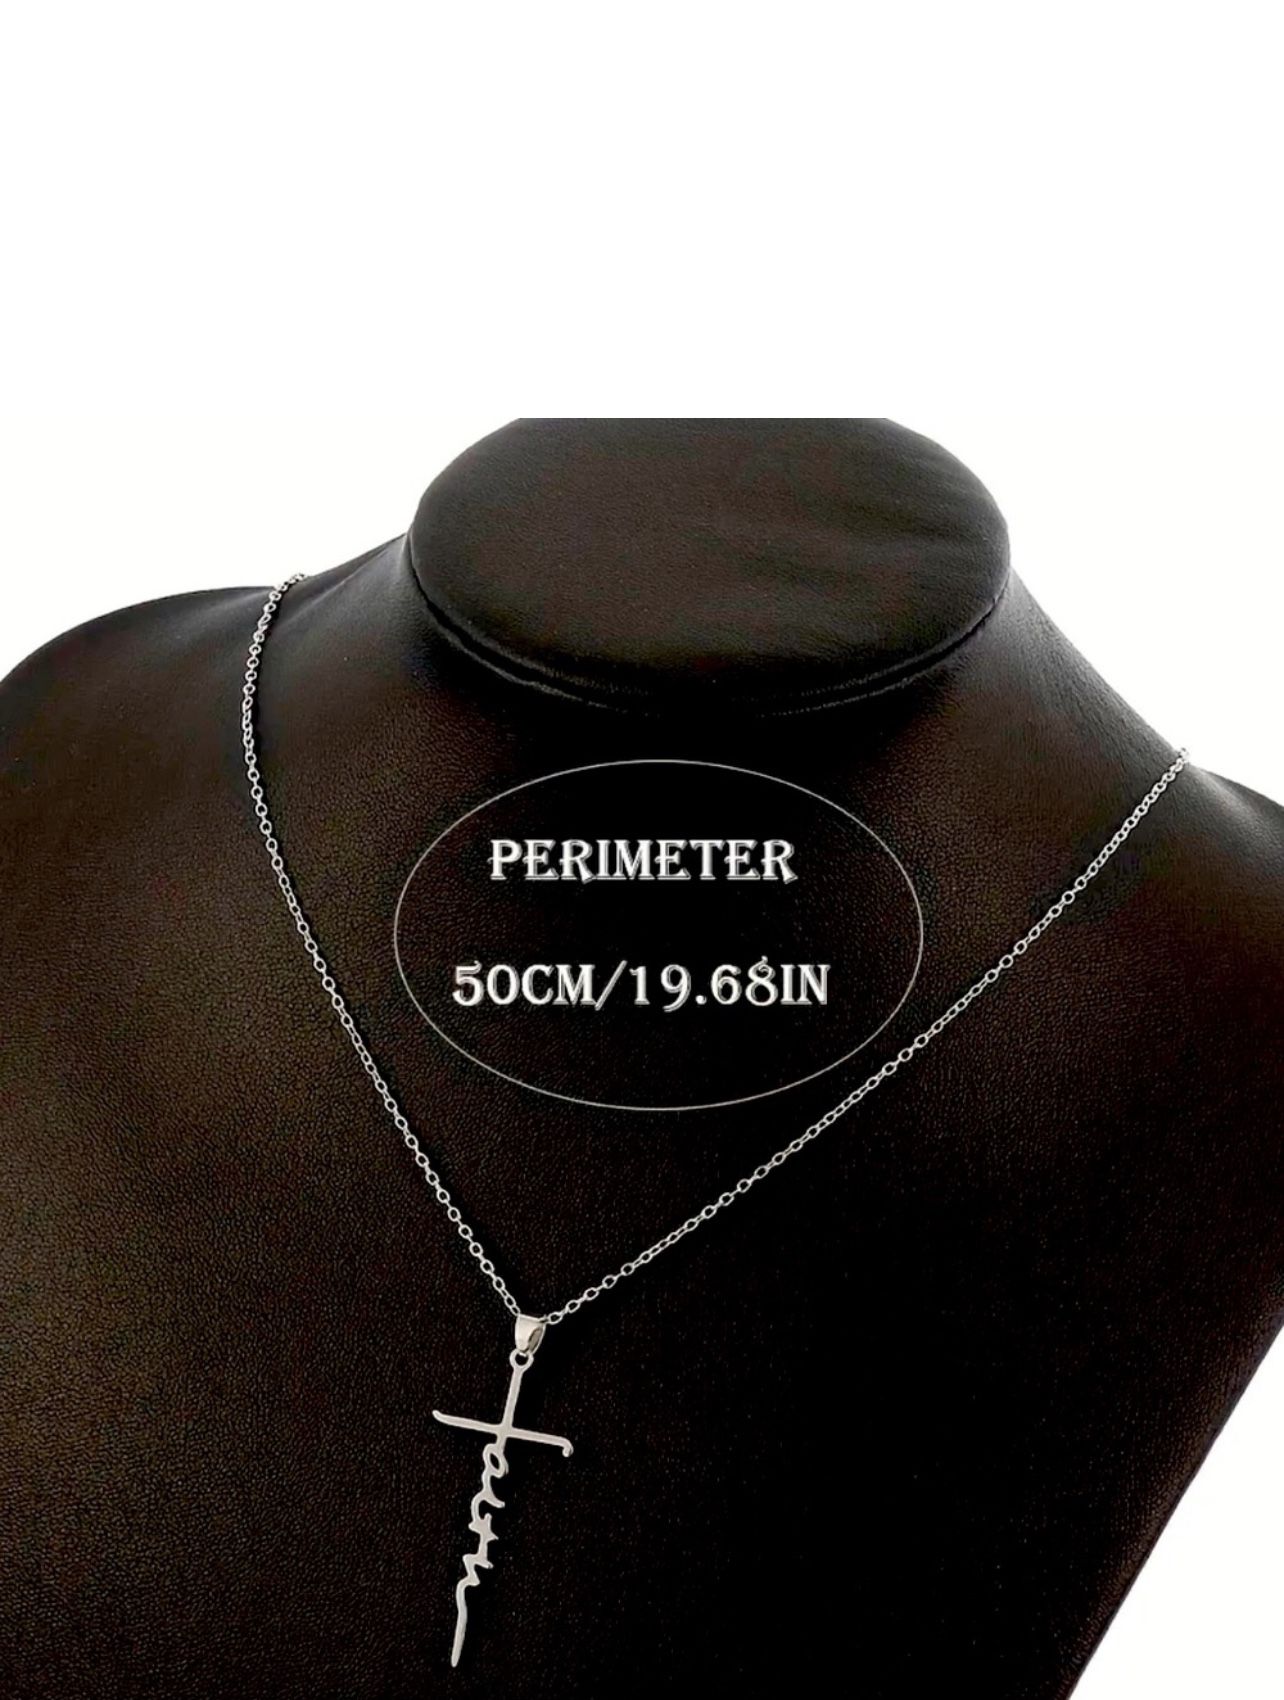 New Stainless Steel Silver Faith Cross Christian Pendant Necklace Jewelry